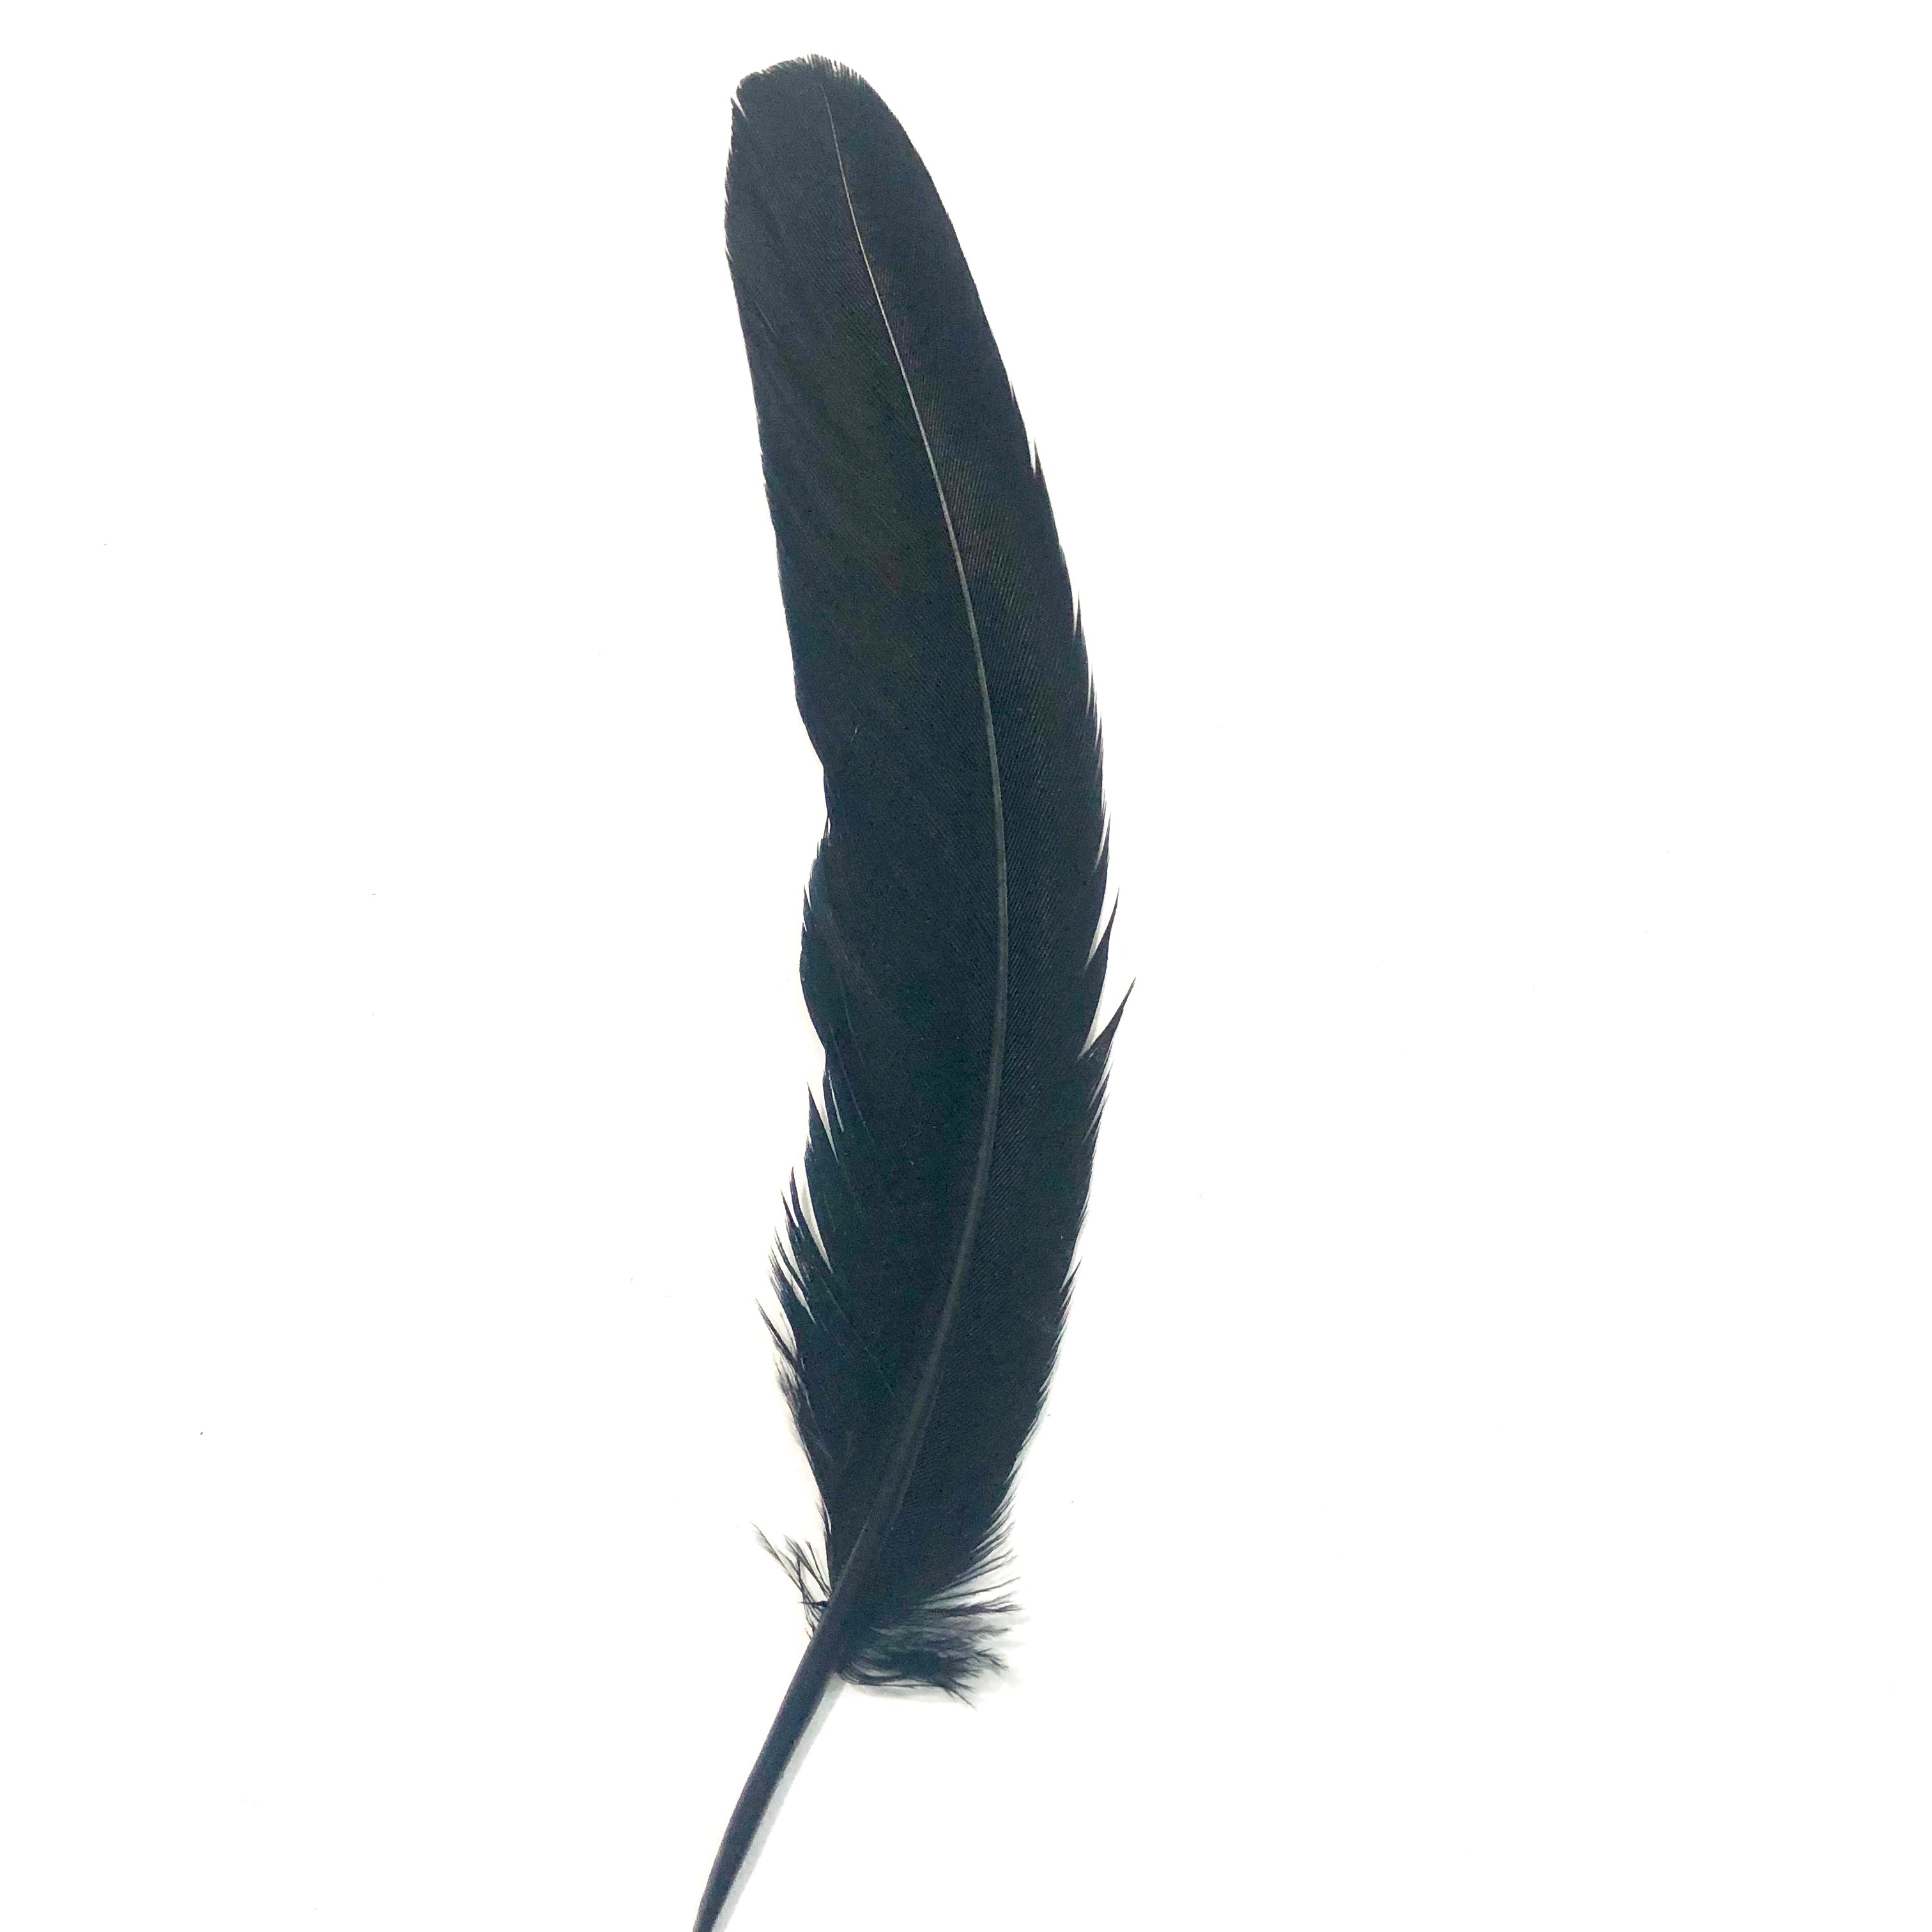 Under 6" Reeves Pheasant Tail Feather x 10 pcs - Black